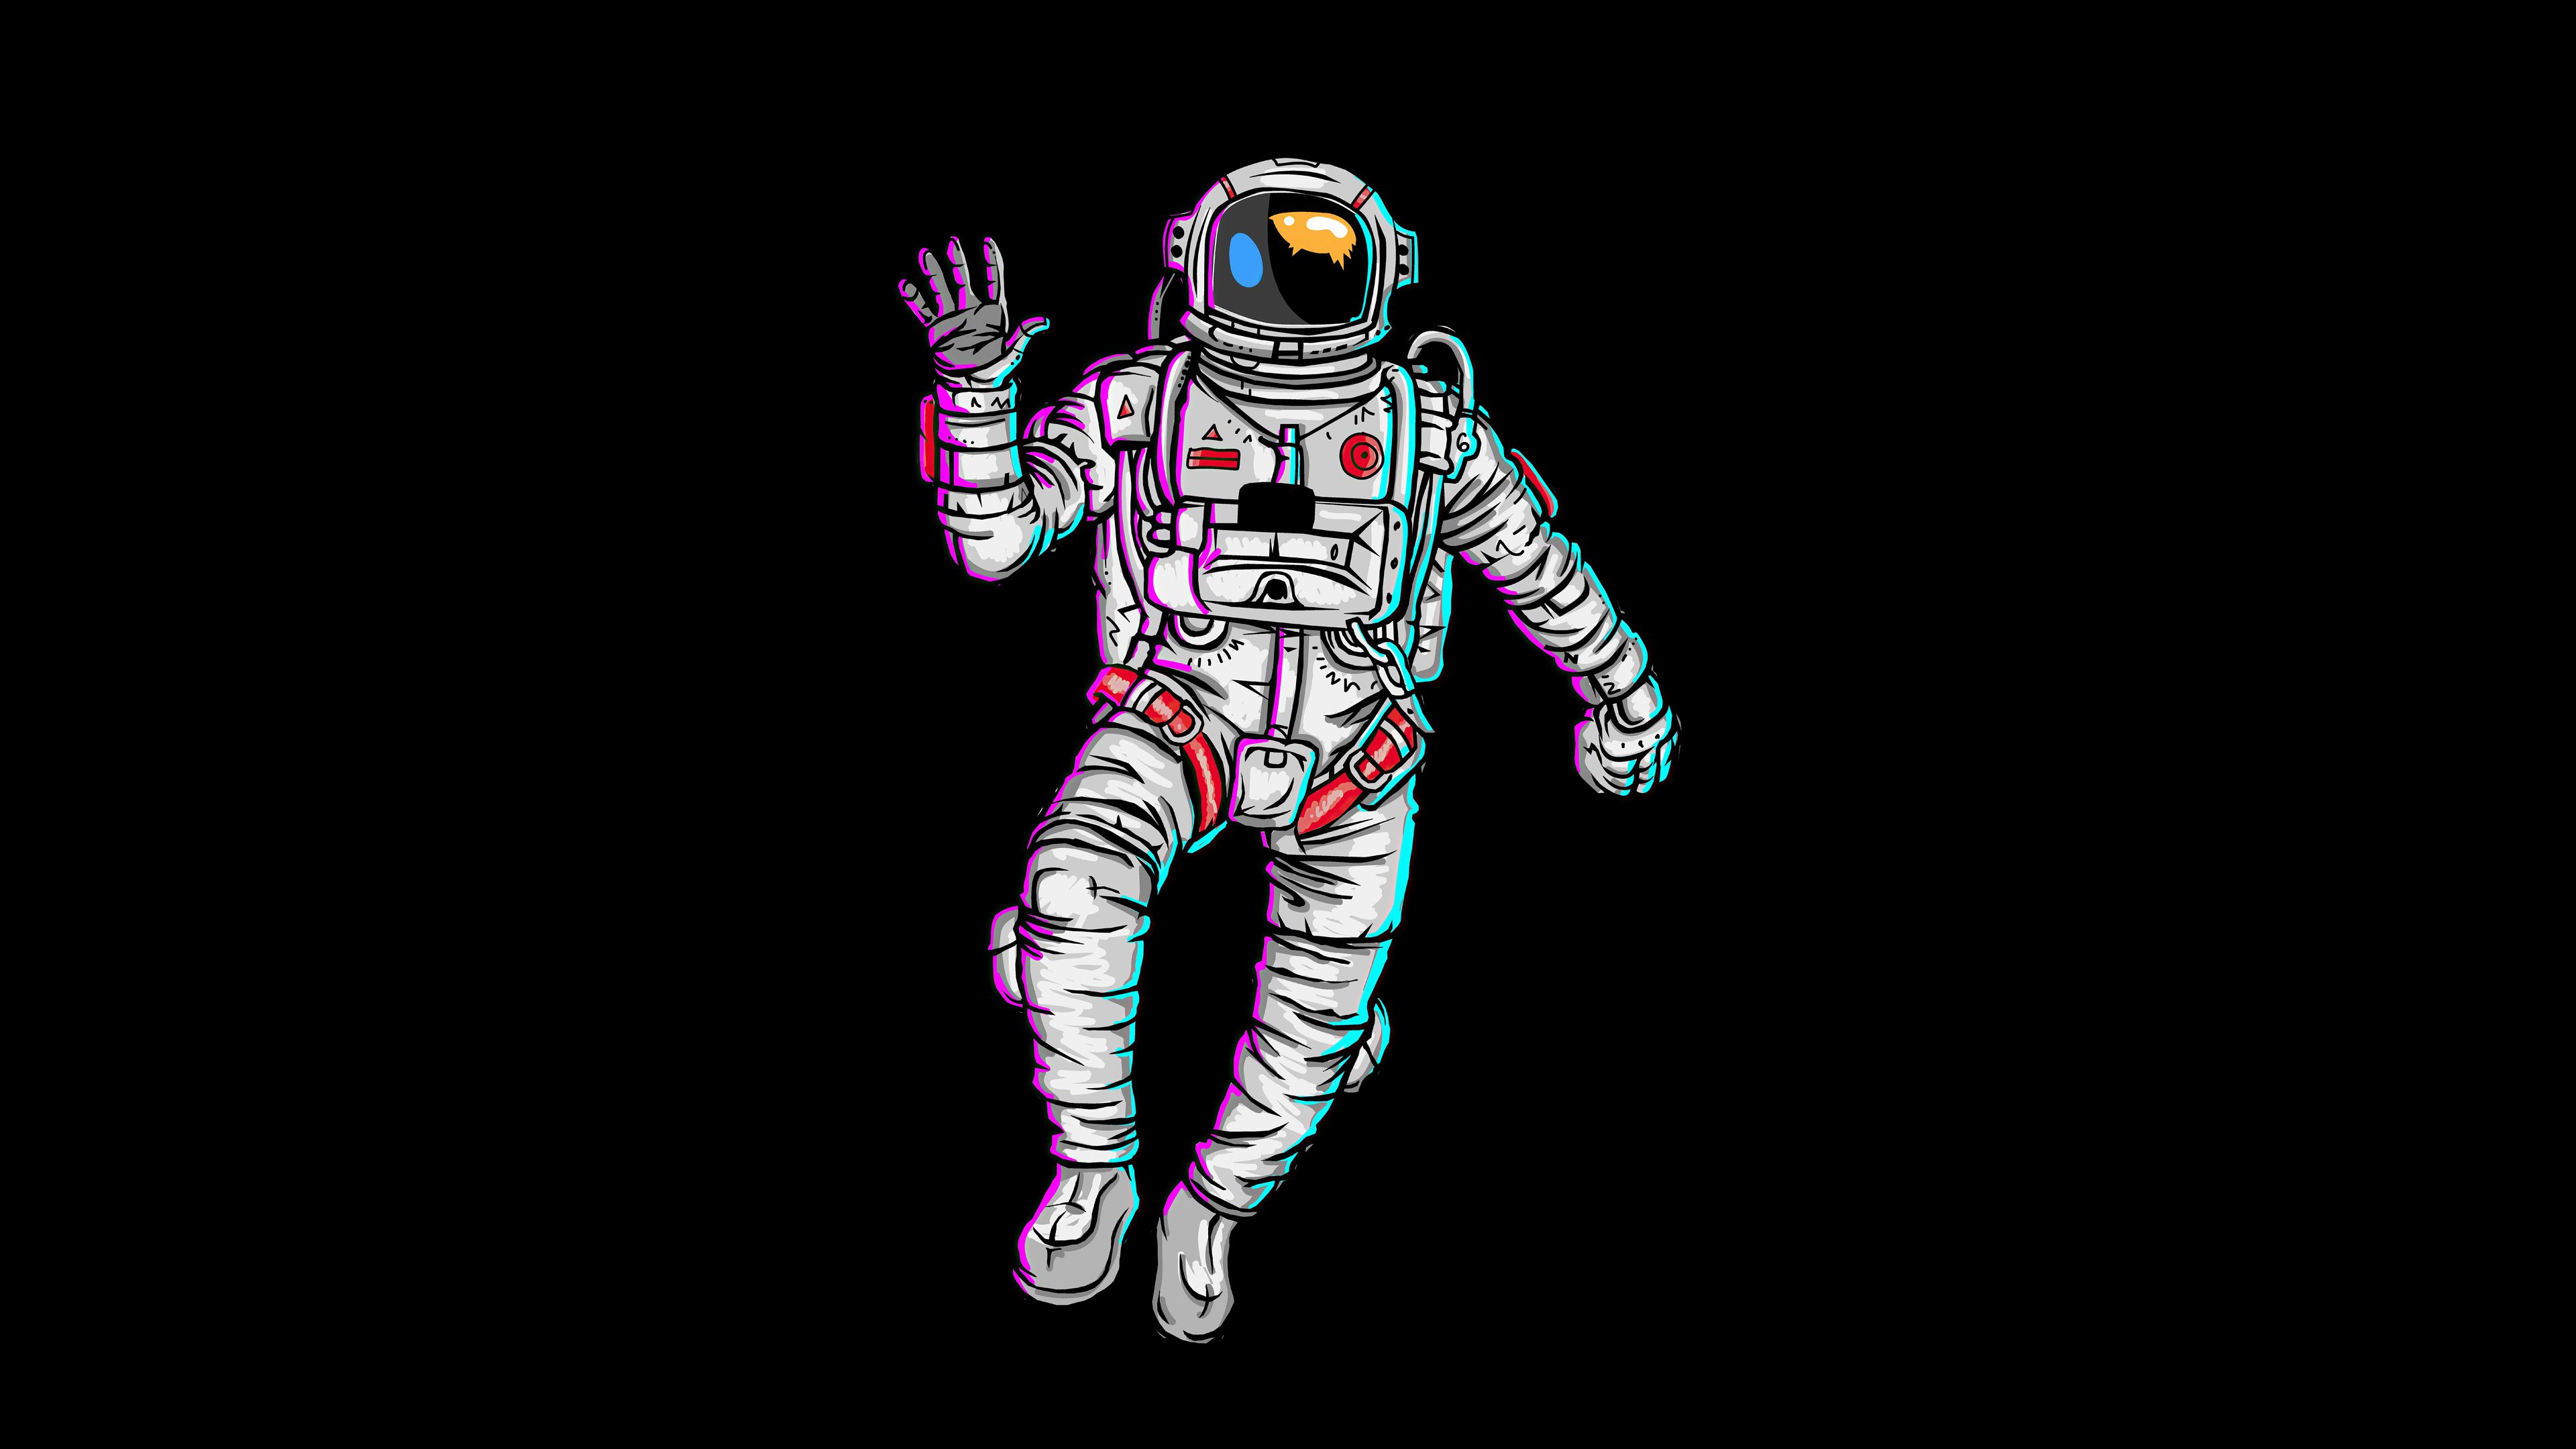 Astronaut Waving Hand Minimal 4k, HD Artist, 4k Wallpaper, Image, Background, Photo and Picture